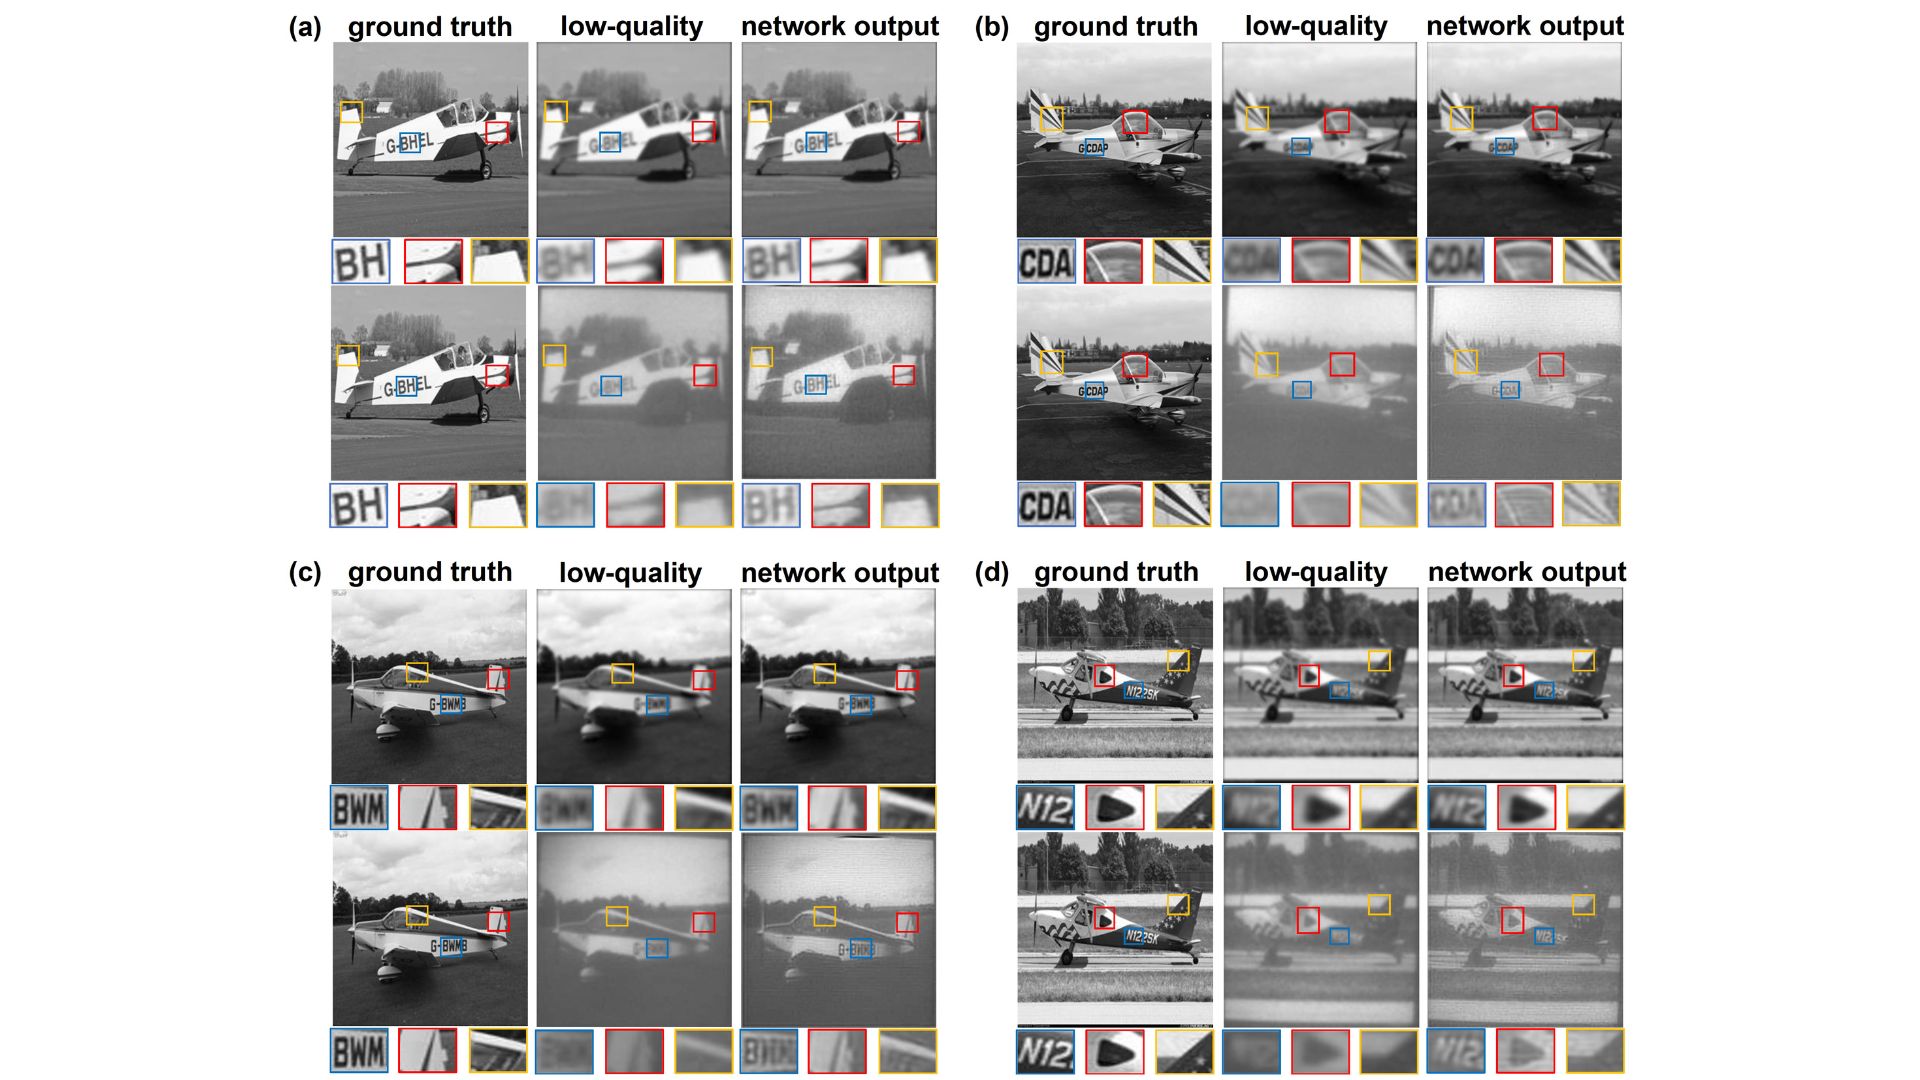 Images compare ground truth, low-quality, and neural network outputs for four test images. Row 1: simulation; Row 2: experimental. Close-ups highlight details.